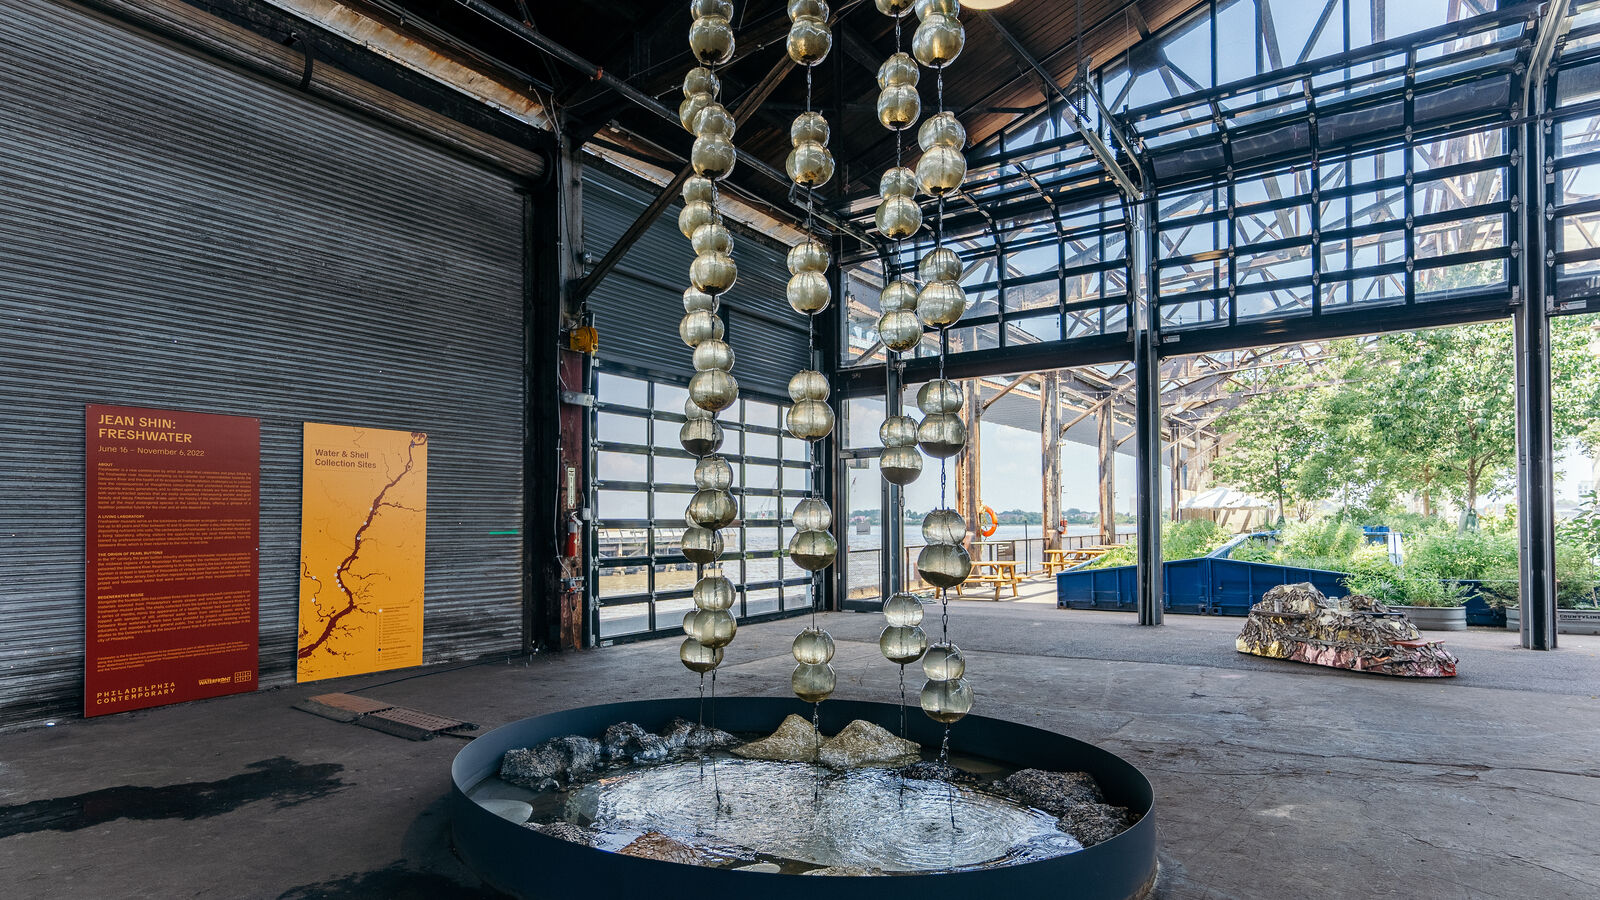 In an open air pier, bulbous glass vessels are suspended in the air from top to bottom. There are four rows of glass vessels, a few contain live mussels that are filtering water in real time. Below the suspended vessels is a shallow fountain basin filled with water trickling down from above, which has been filtered by the mussels. In the basin are pearl blankets in various mounds, the pearls range from snowy white pearlescent to the darker outer shell color of mussels. The pearl blankets were hand sewn and shimmer with each drop of water that comes into contact with them.